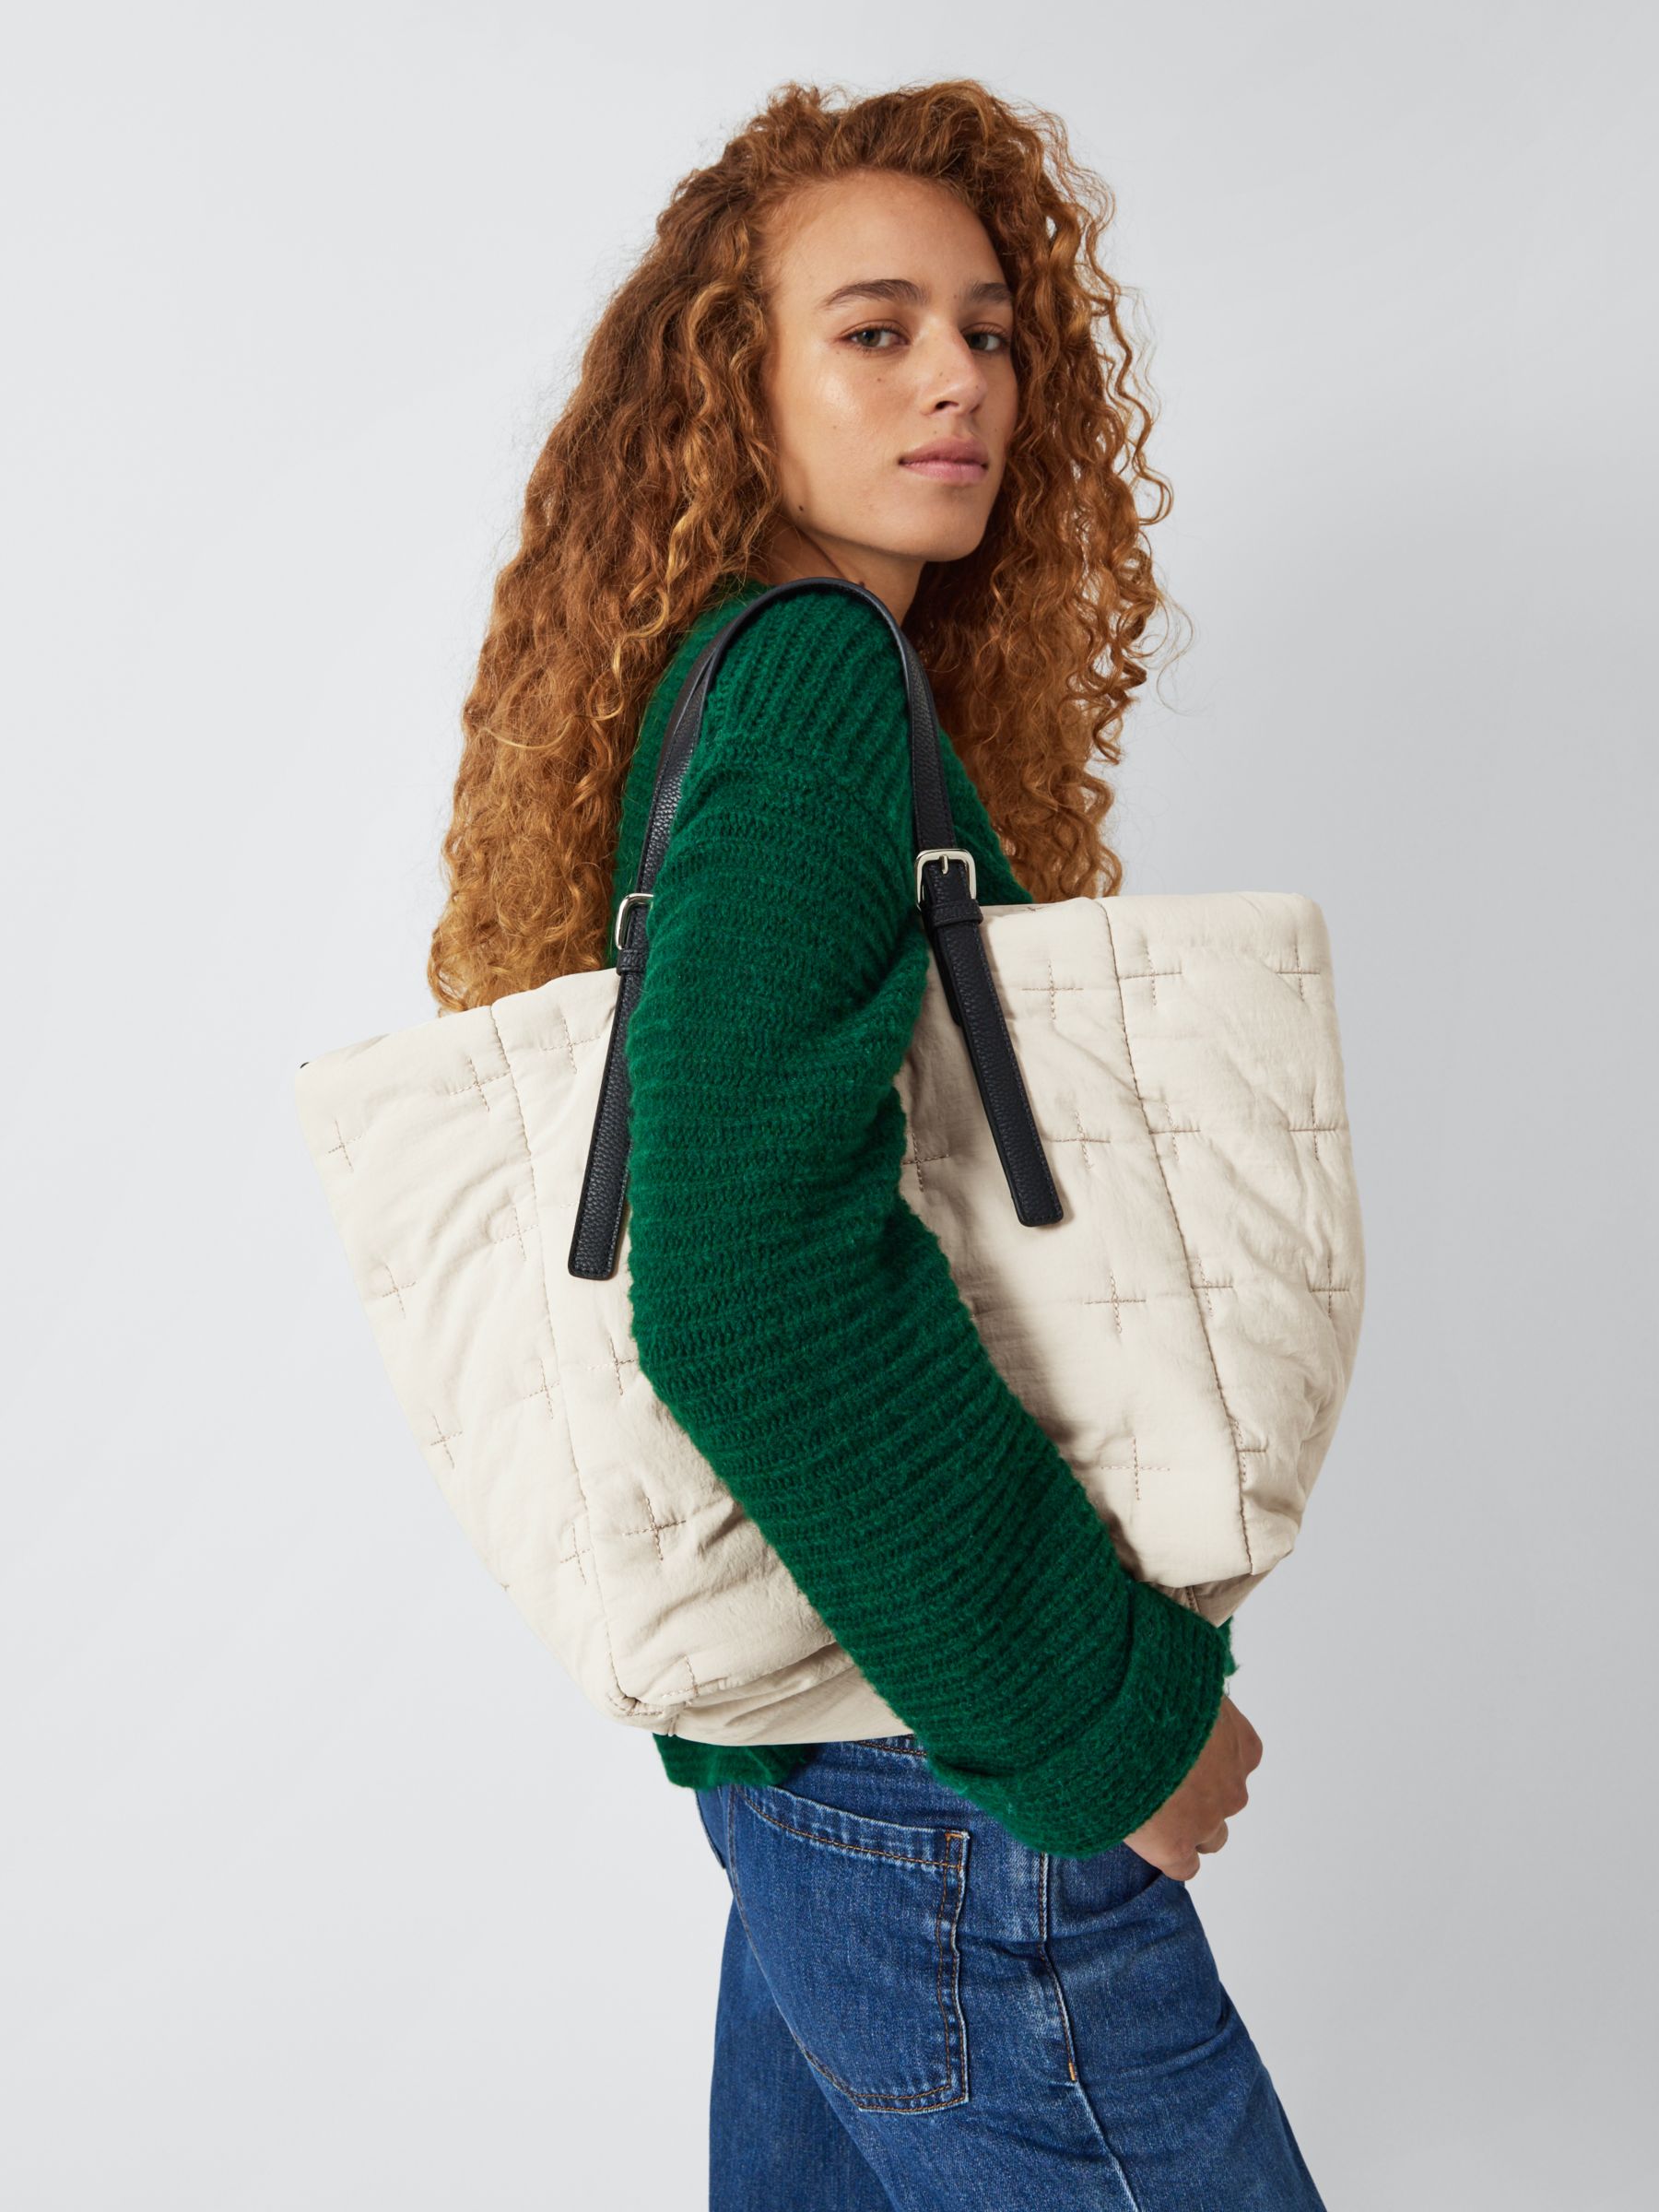 John Lewis ANYDAY Quilted Puffy Tote Bag